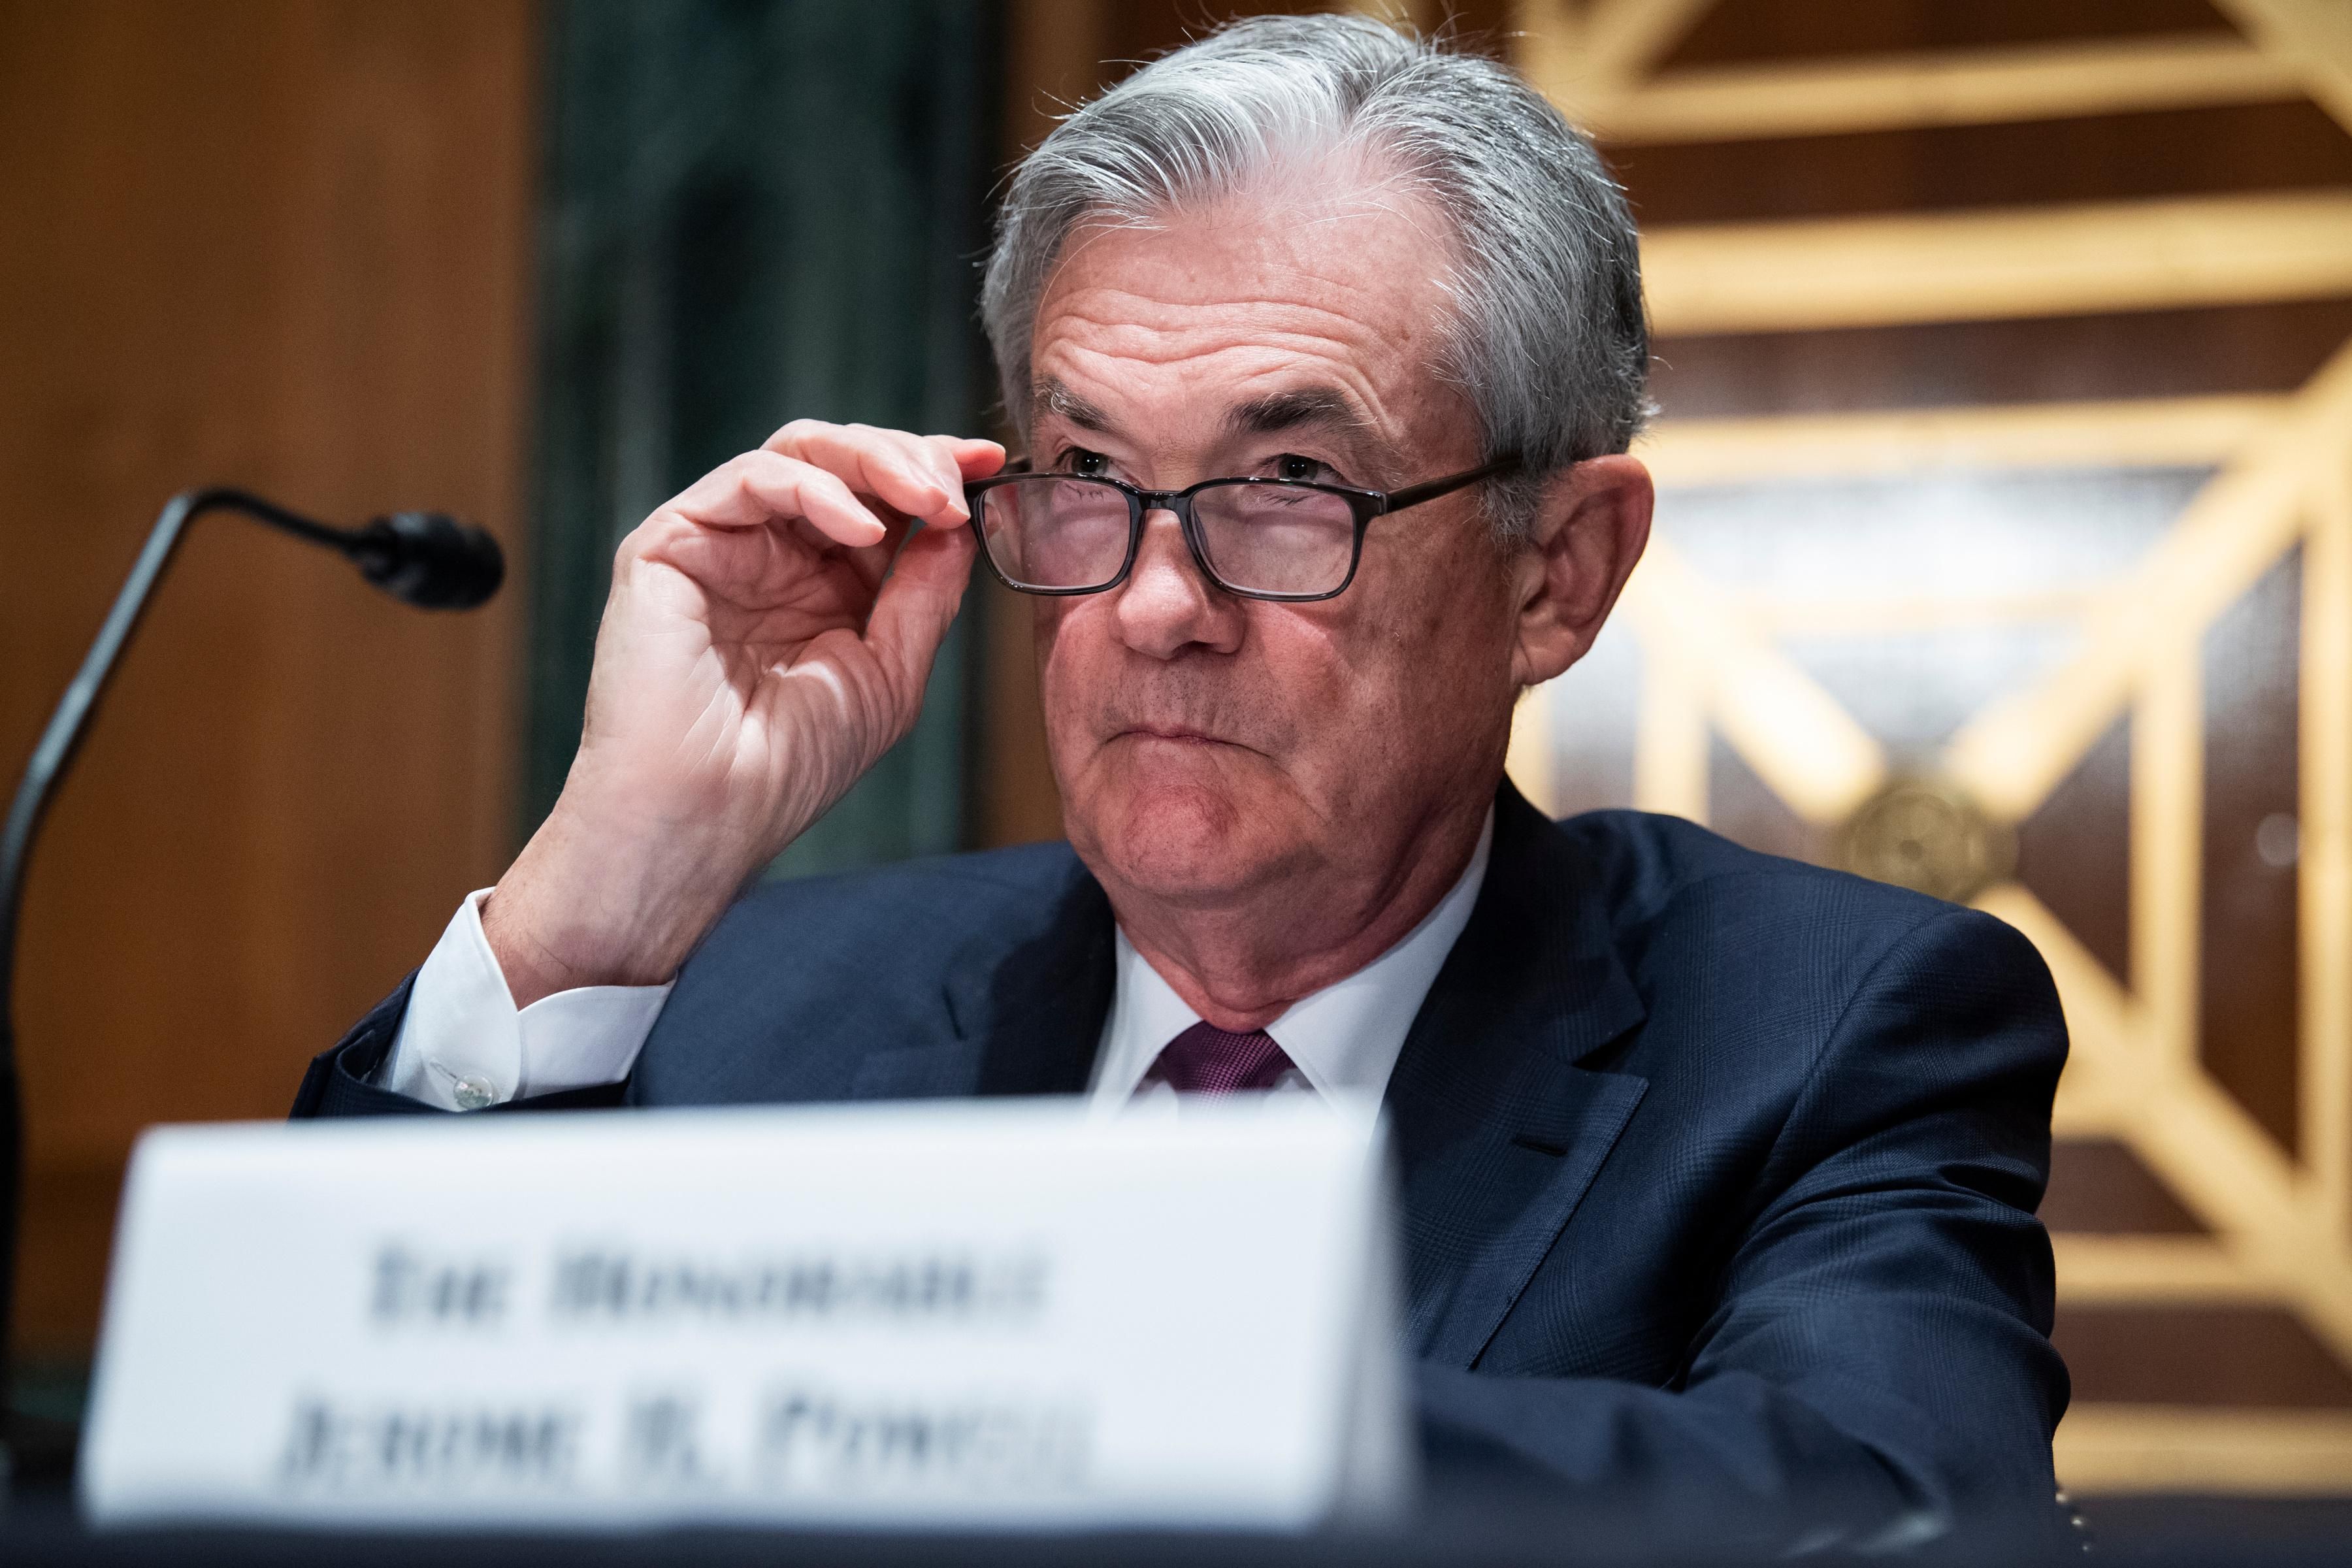 Fed Chair Jerome Powell appears at a Senate hearing